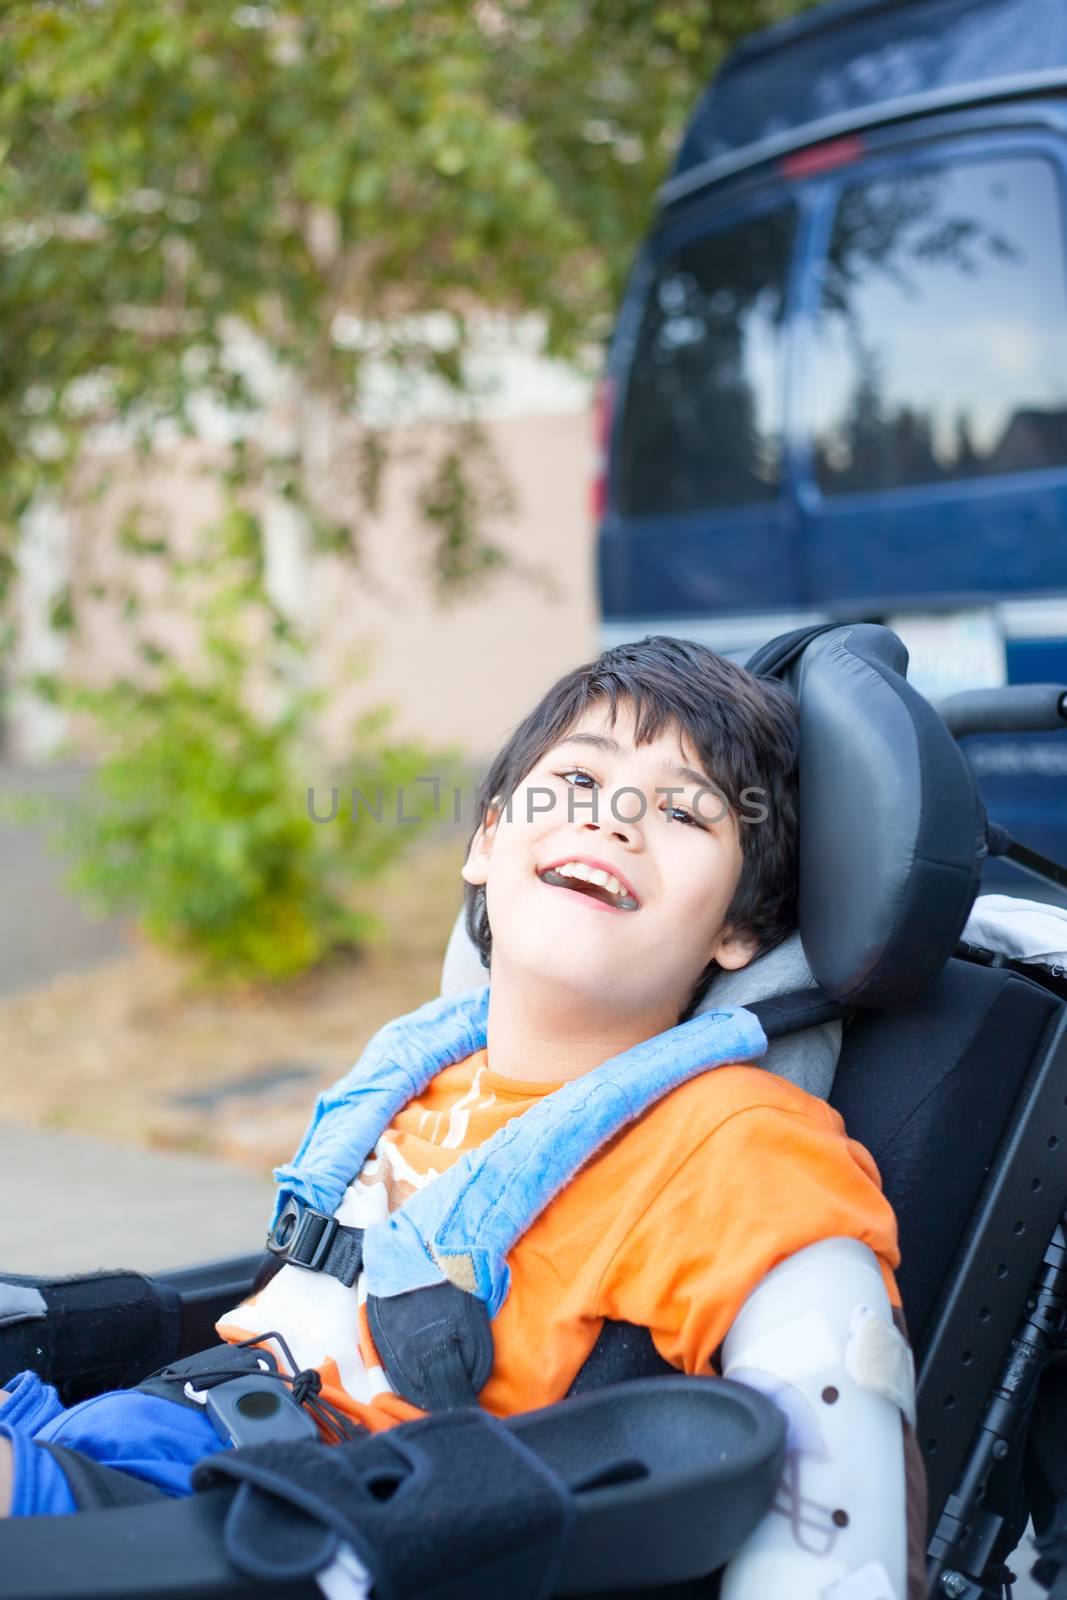 Biracial ten year old boy sitting in wheelchair outdoors smiling and relaxing